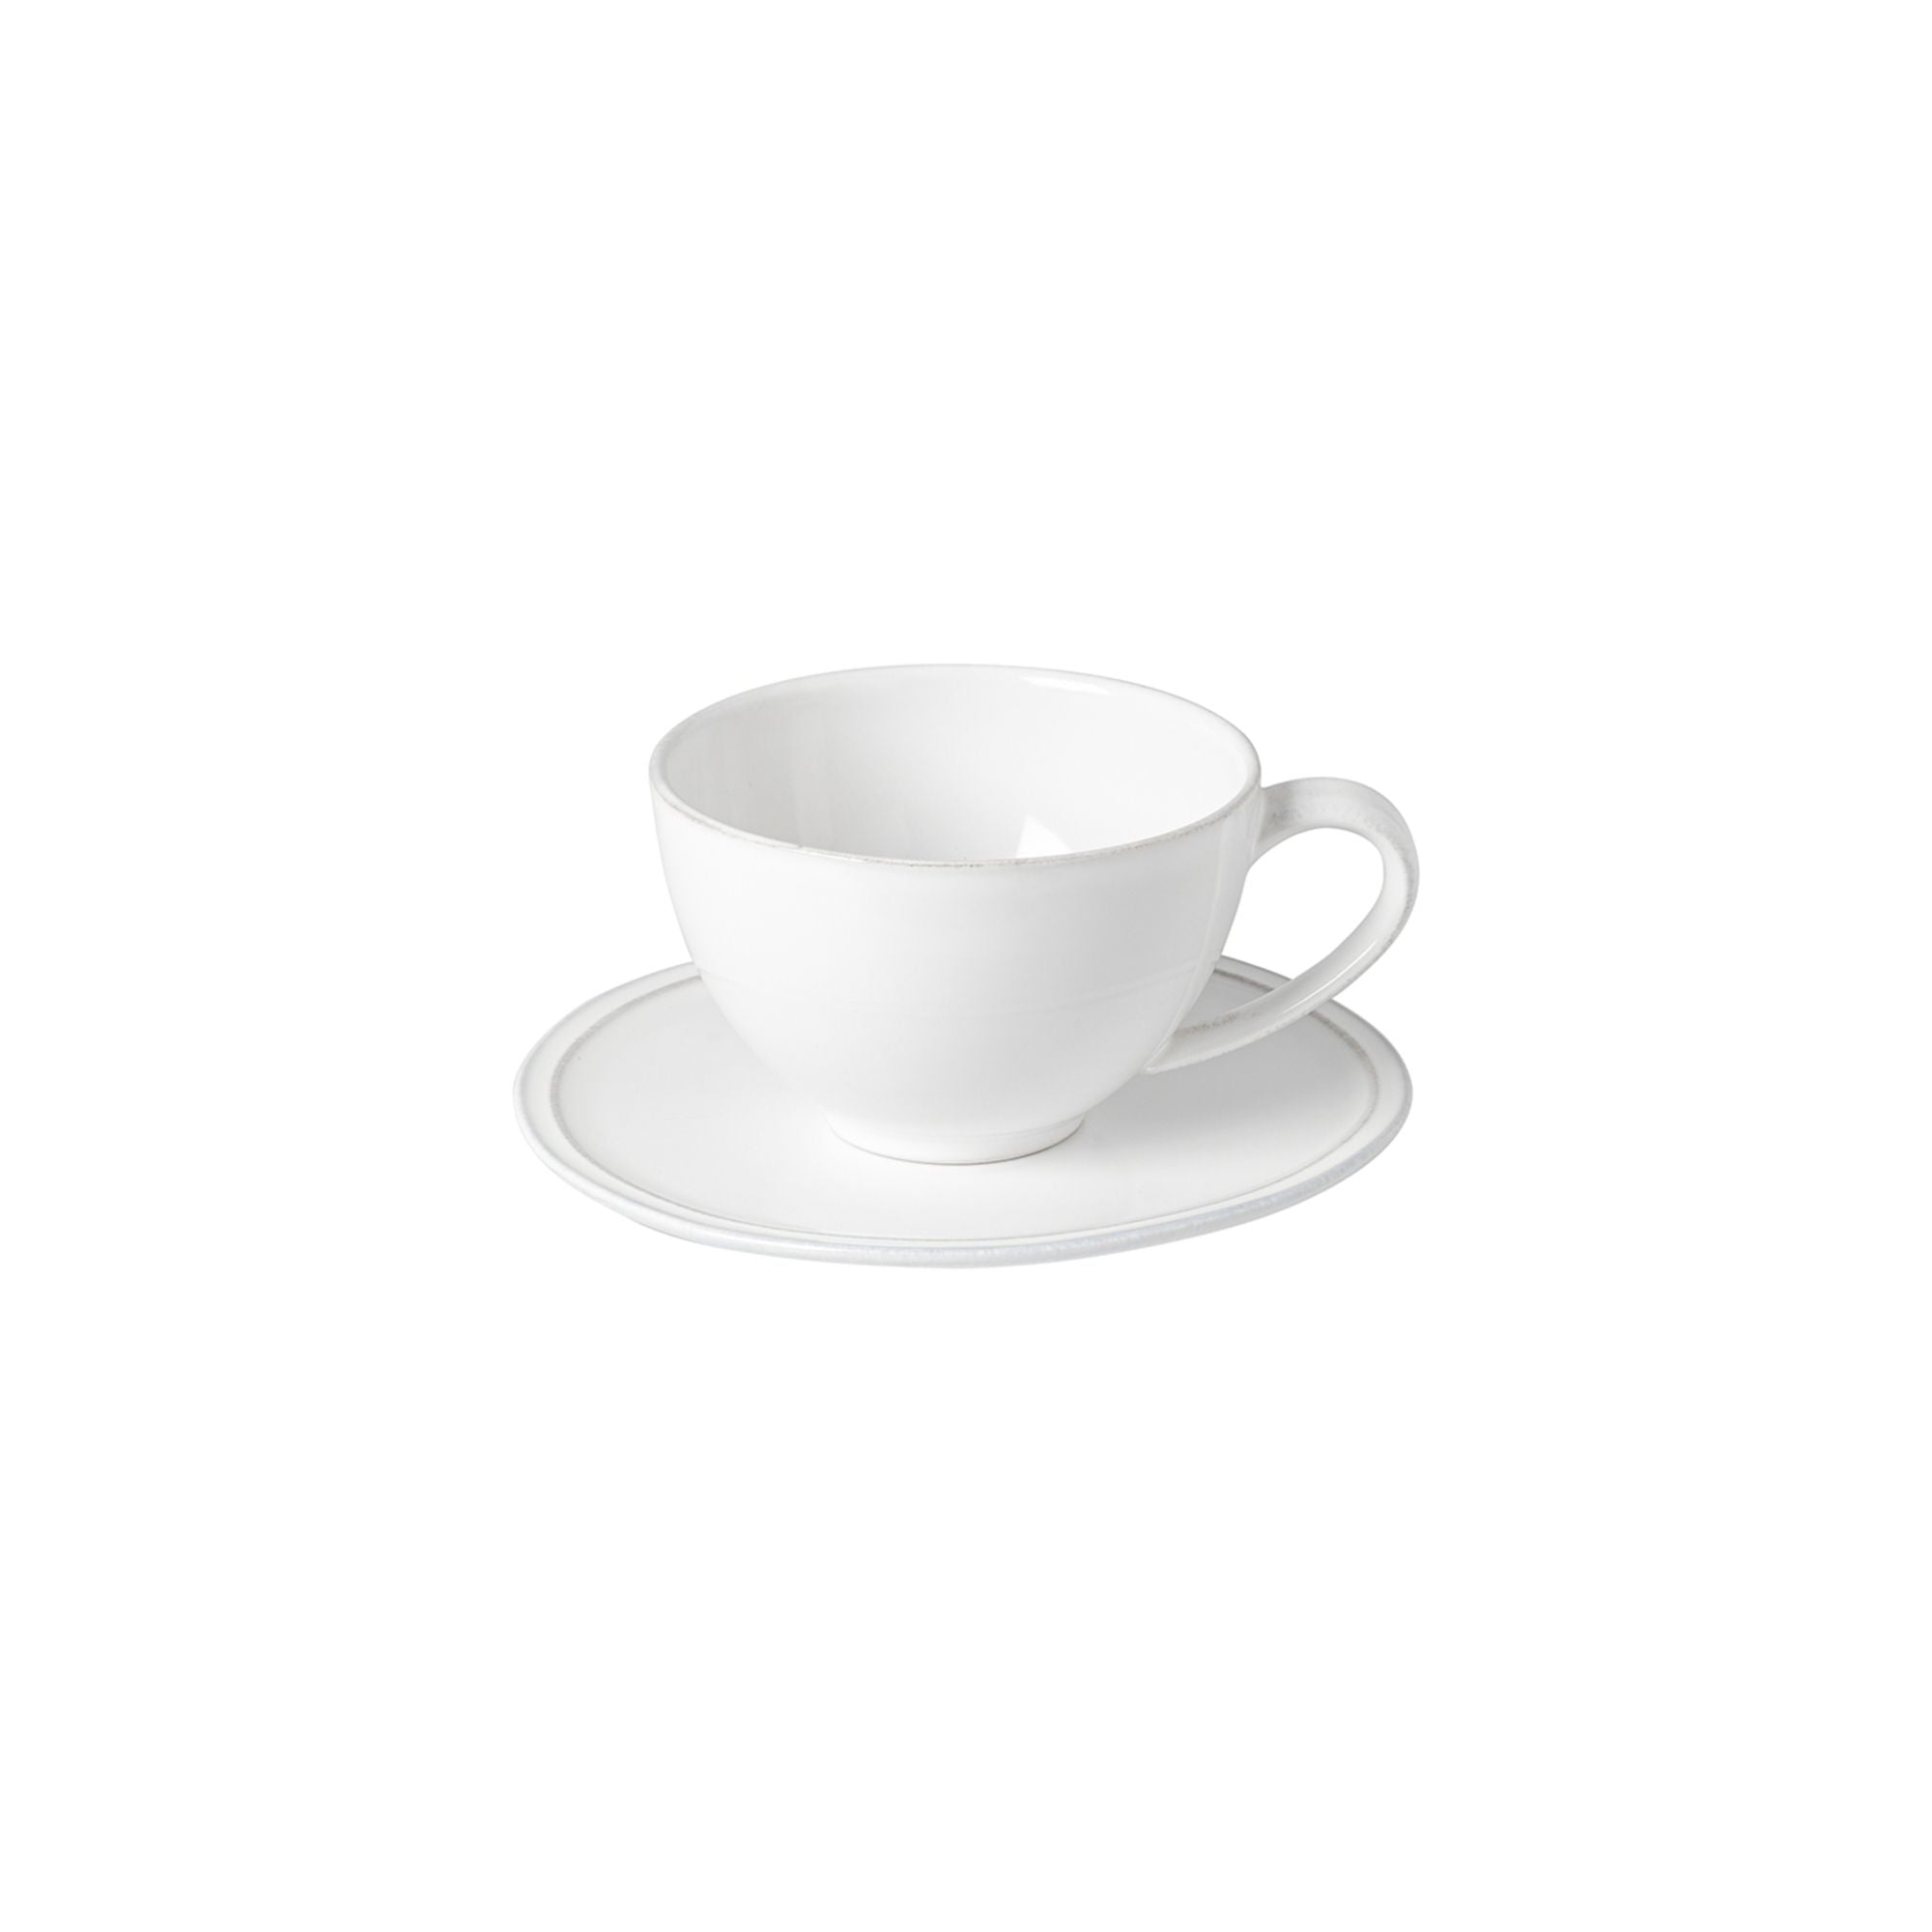 Friso Tea Cup and Saucer 9 oz. White